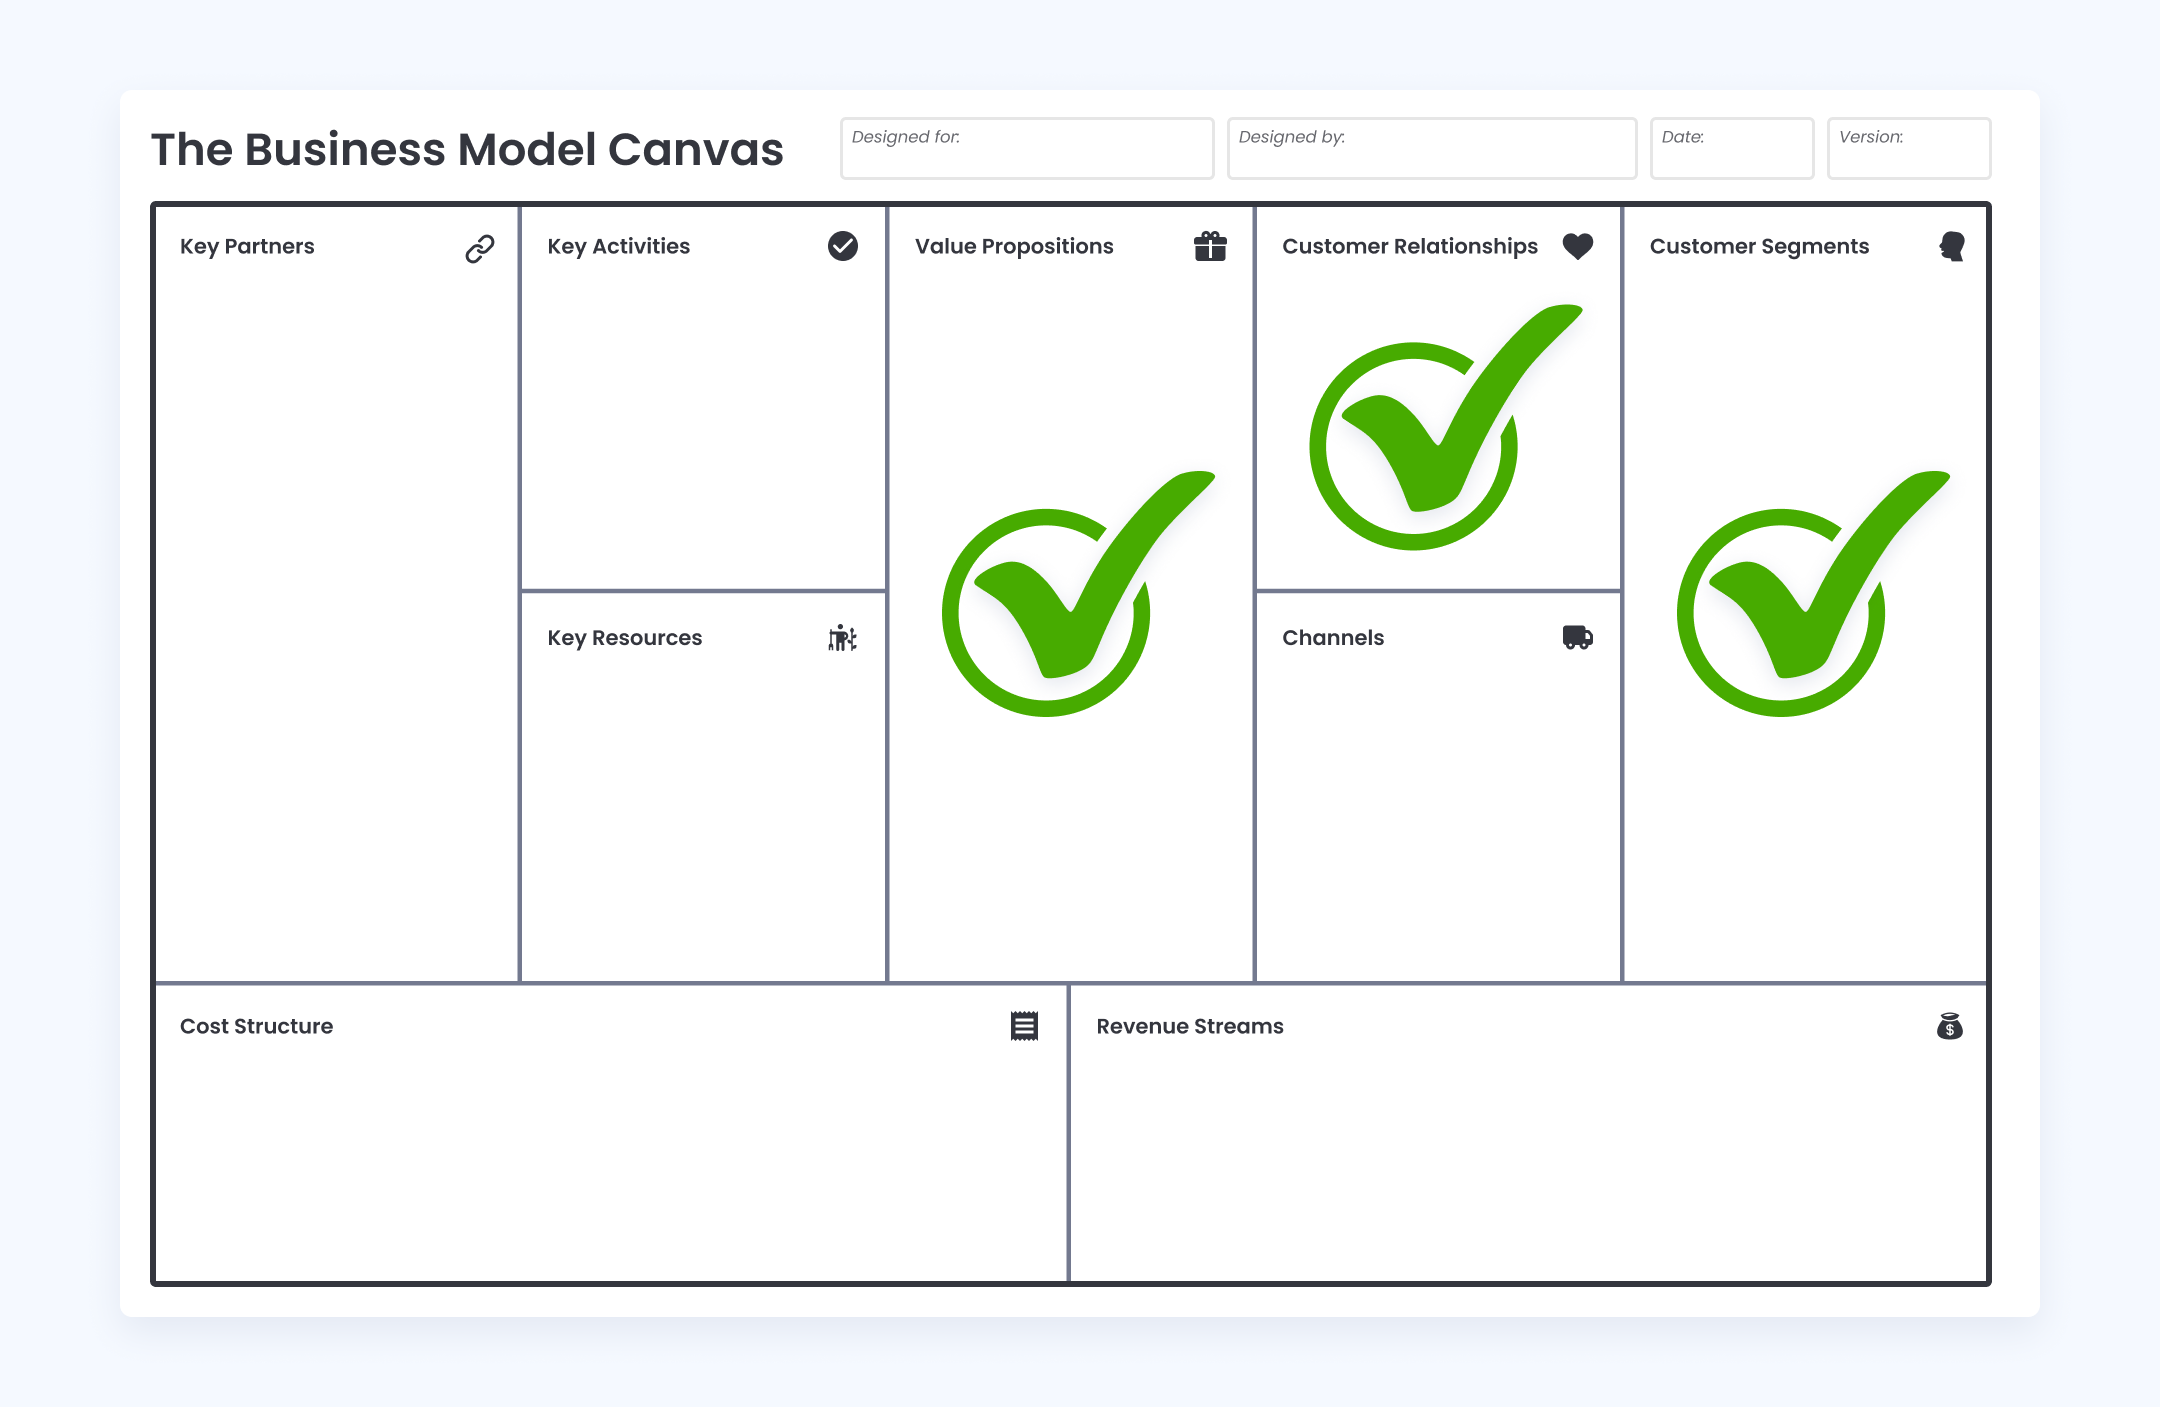 Using Lean Canvas as a part of customer research